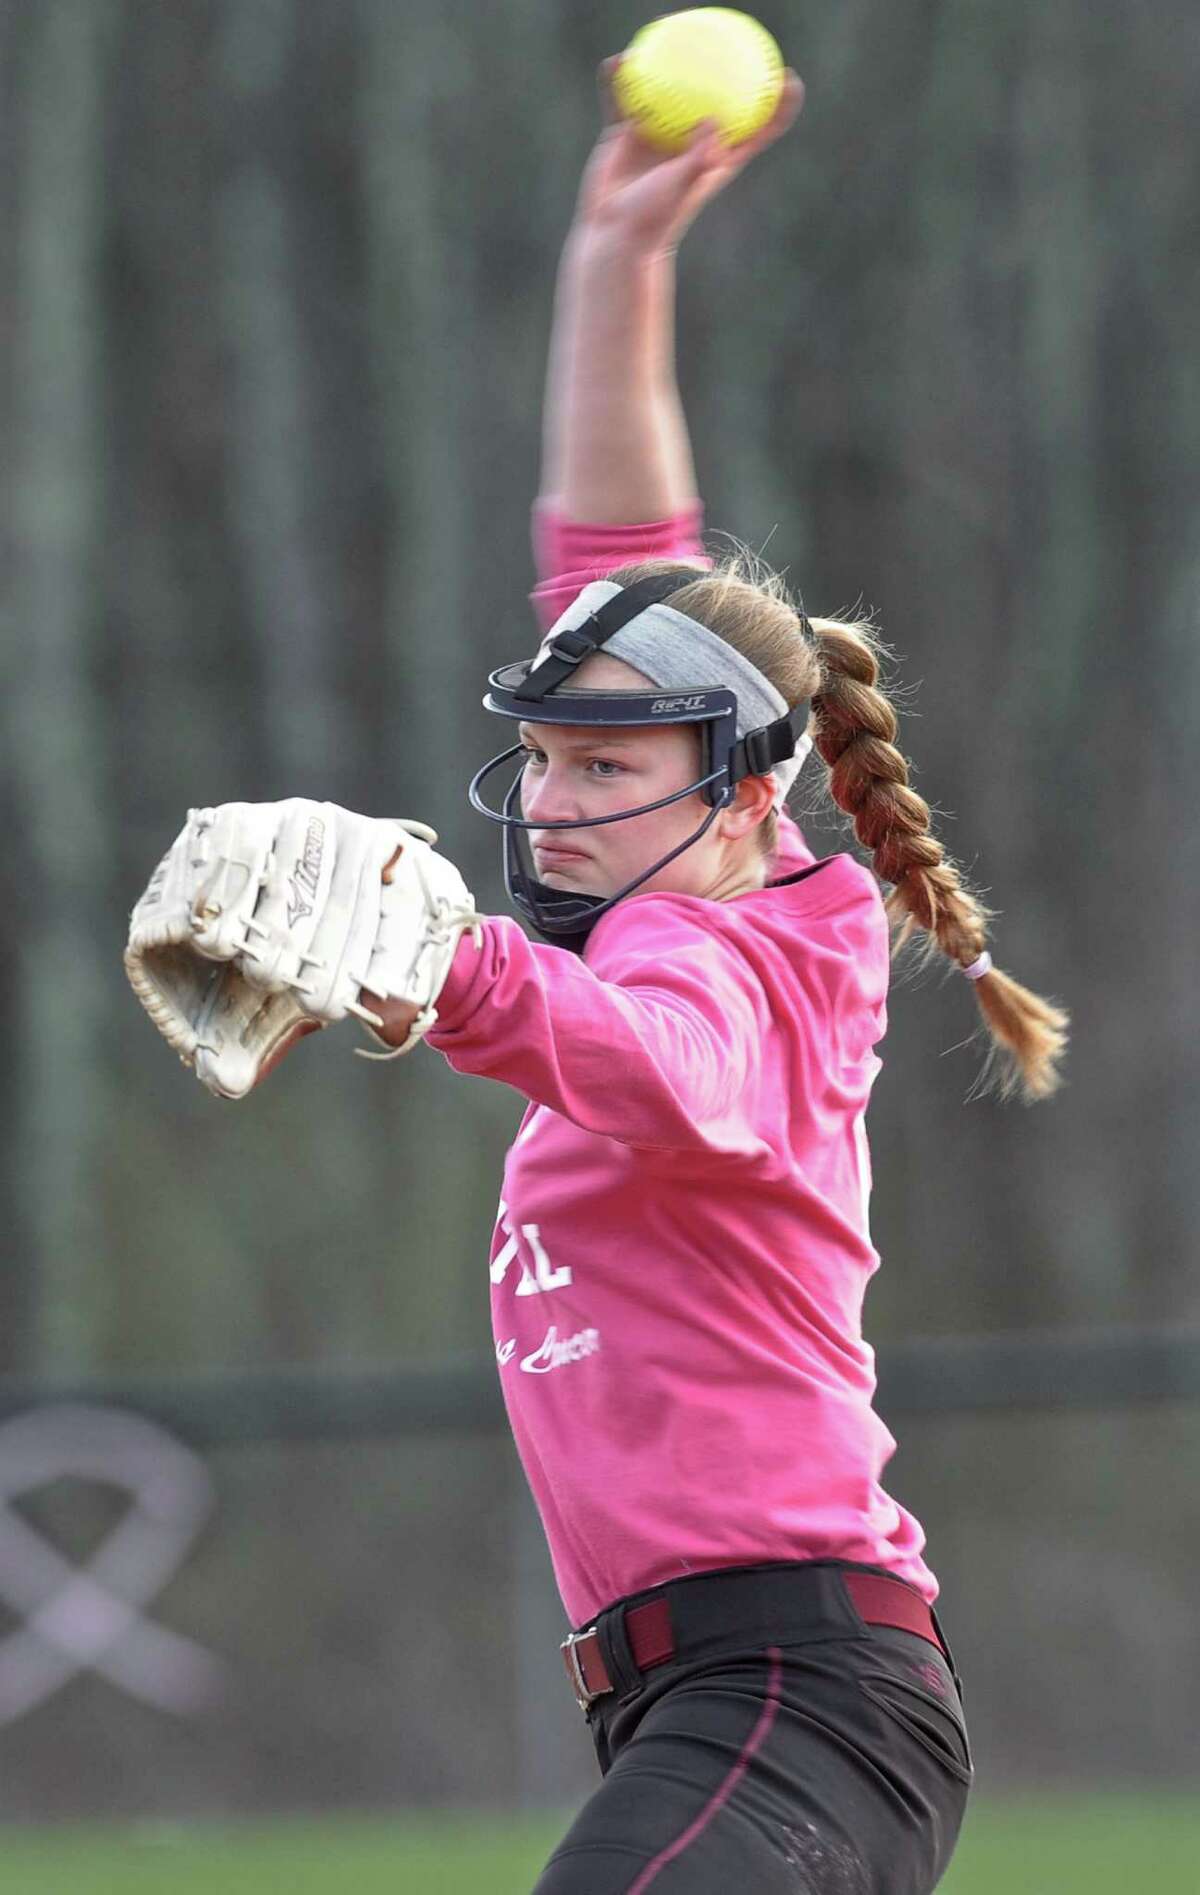 FILE PHOTO: Bethel's Annika Haskett (9) pitches in the girls high school softball game between Abbott Tech and Bethel high schools played at Freebairn Field, in Bethel, Conn, on Thursday night, April 23, 2015.